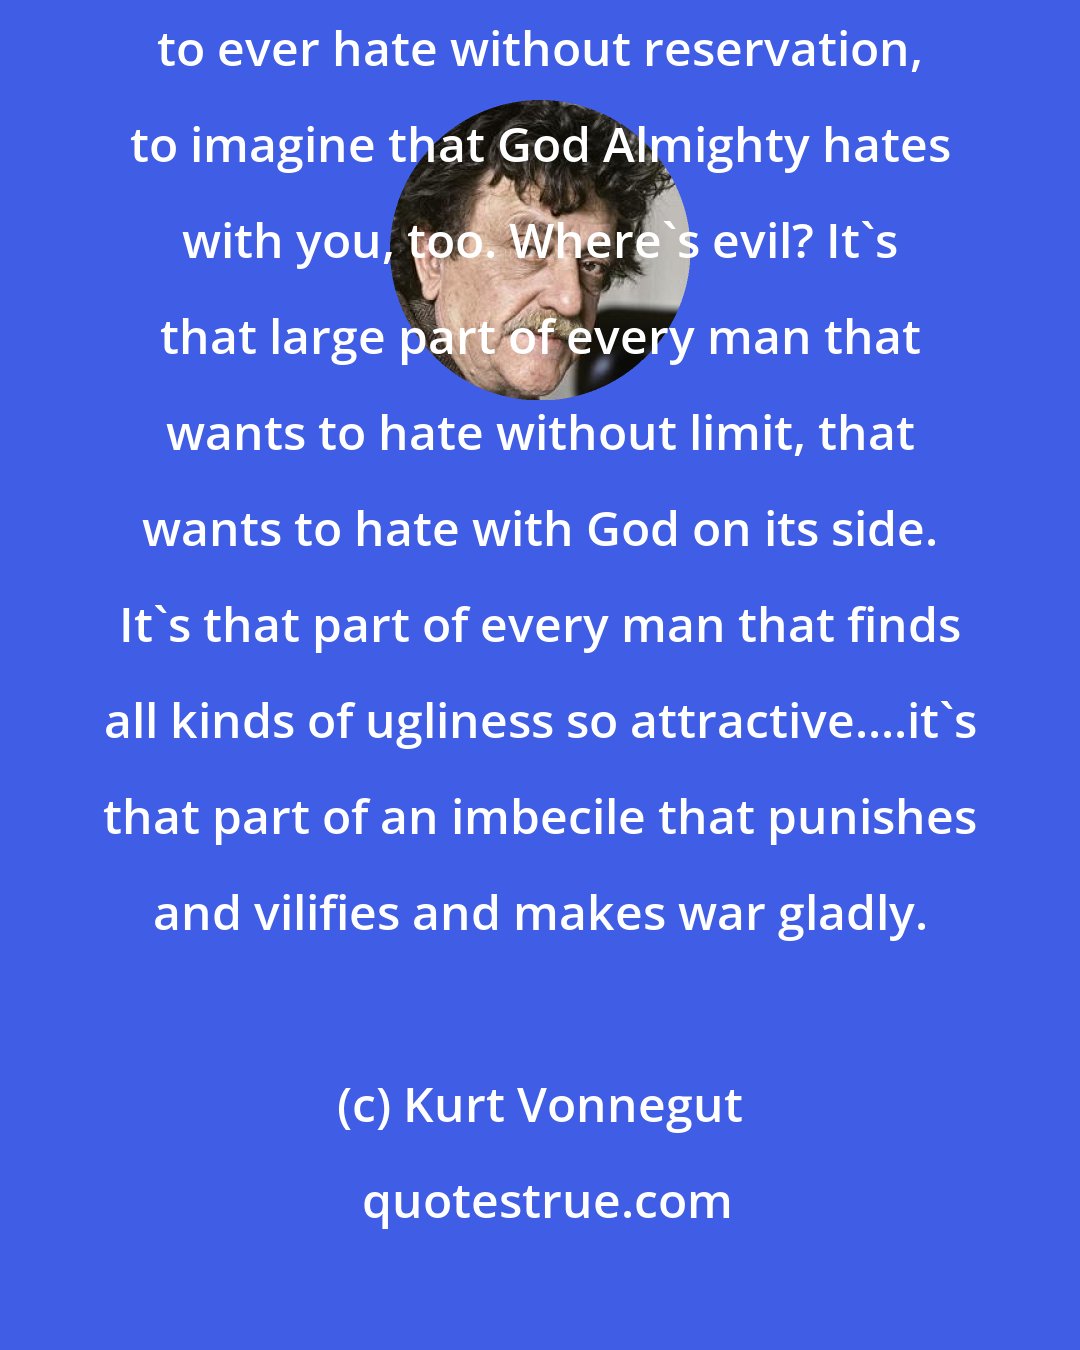 Kurt Vonnegut: There are plenty of good reasons for fighting...but no good reason to ever hate without reservation, to imagine that God Almighty hates with you, too. Where's evil? It's that large part of every man that wants to hate without limit, that wants to hate with God on its side. It's that part of every man that finds all kinds of ugliness so attractive....it's that part of an imbecile that punishes and vilifies and makes war gladly.